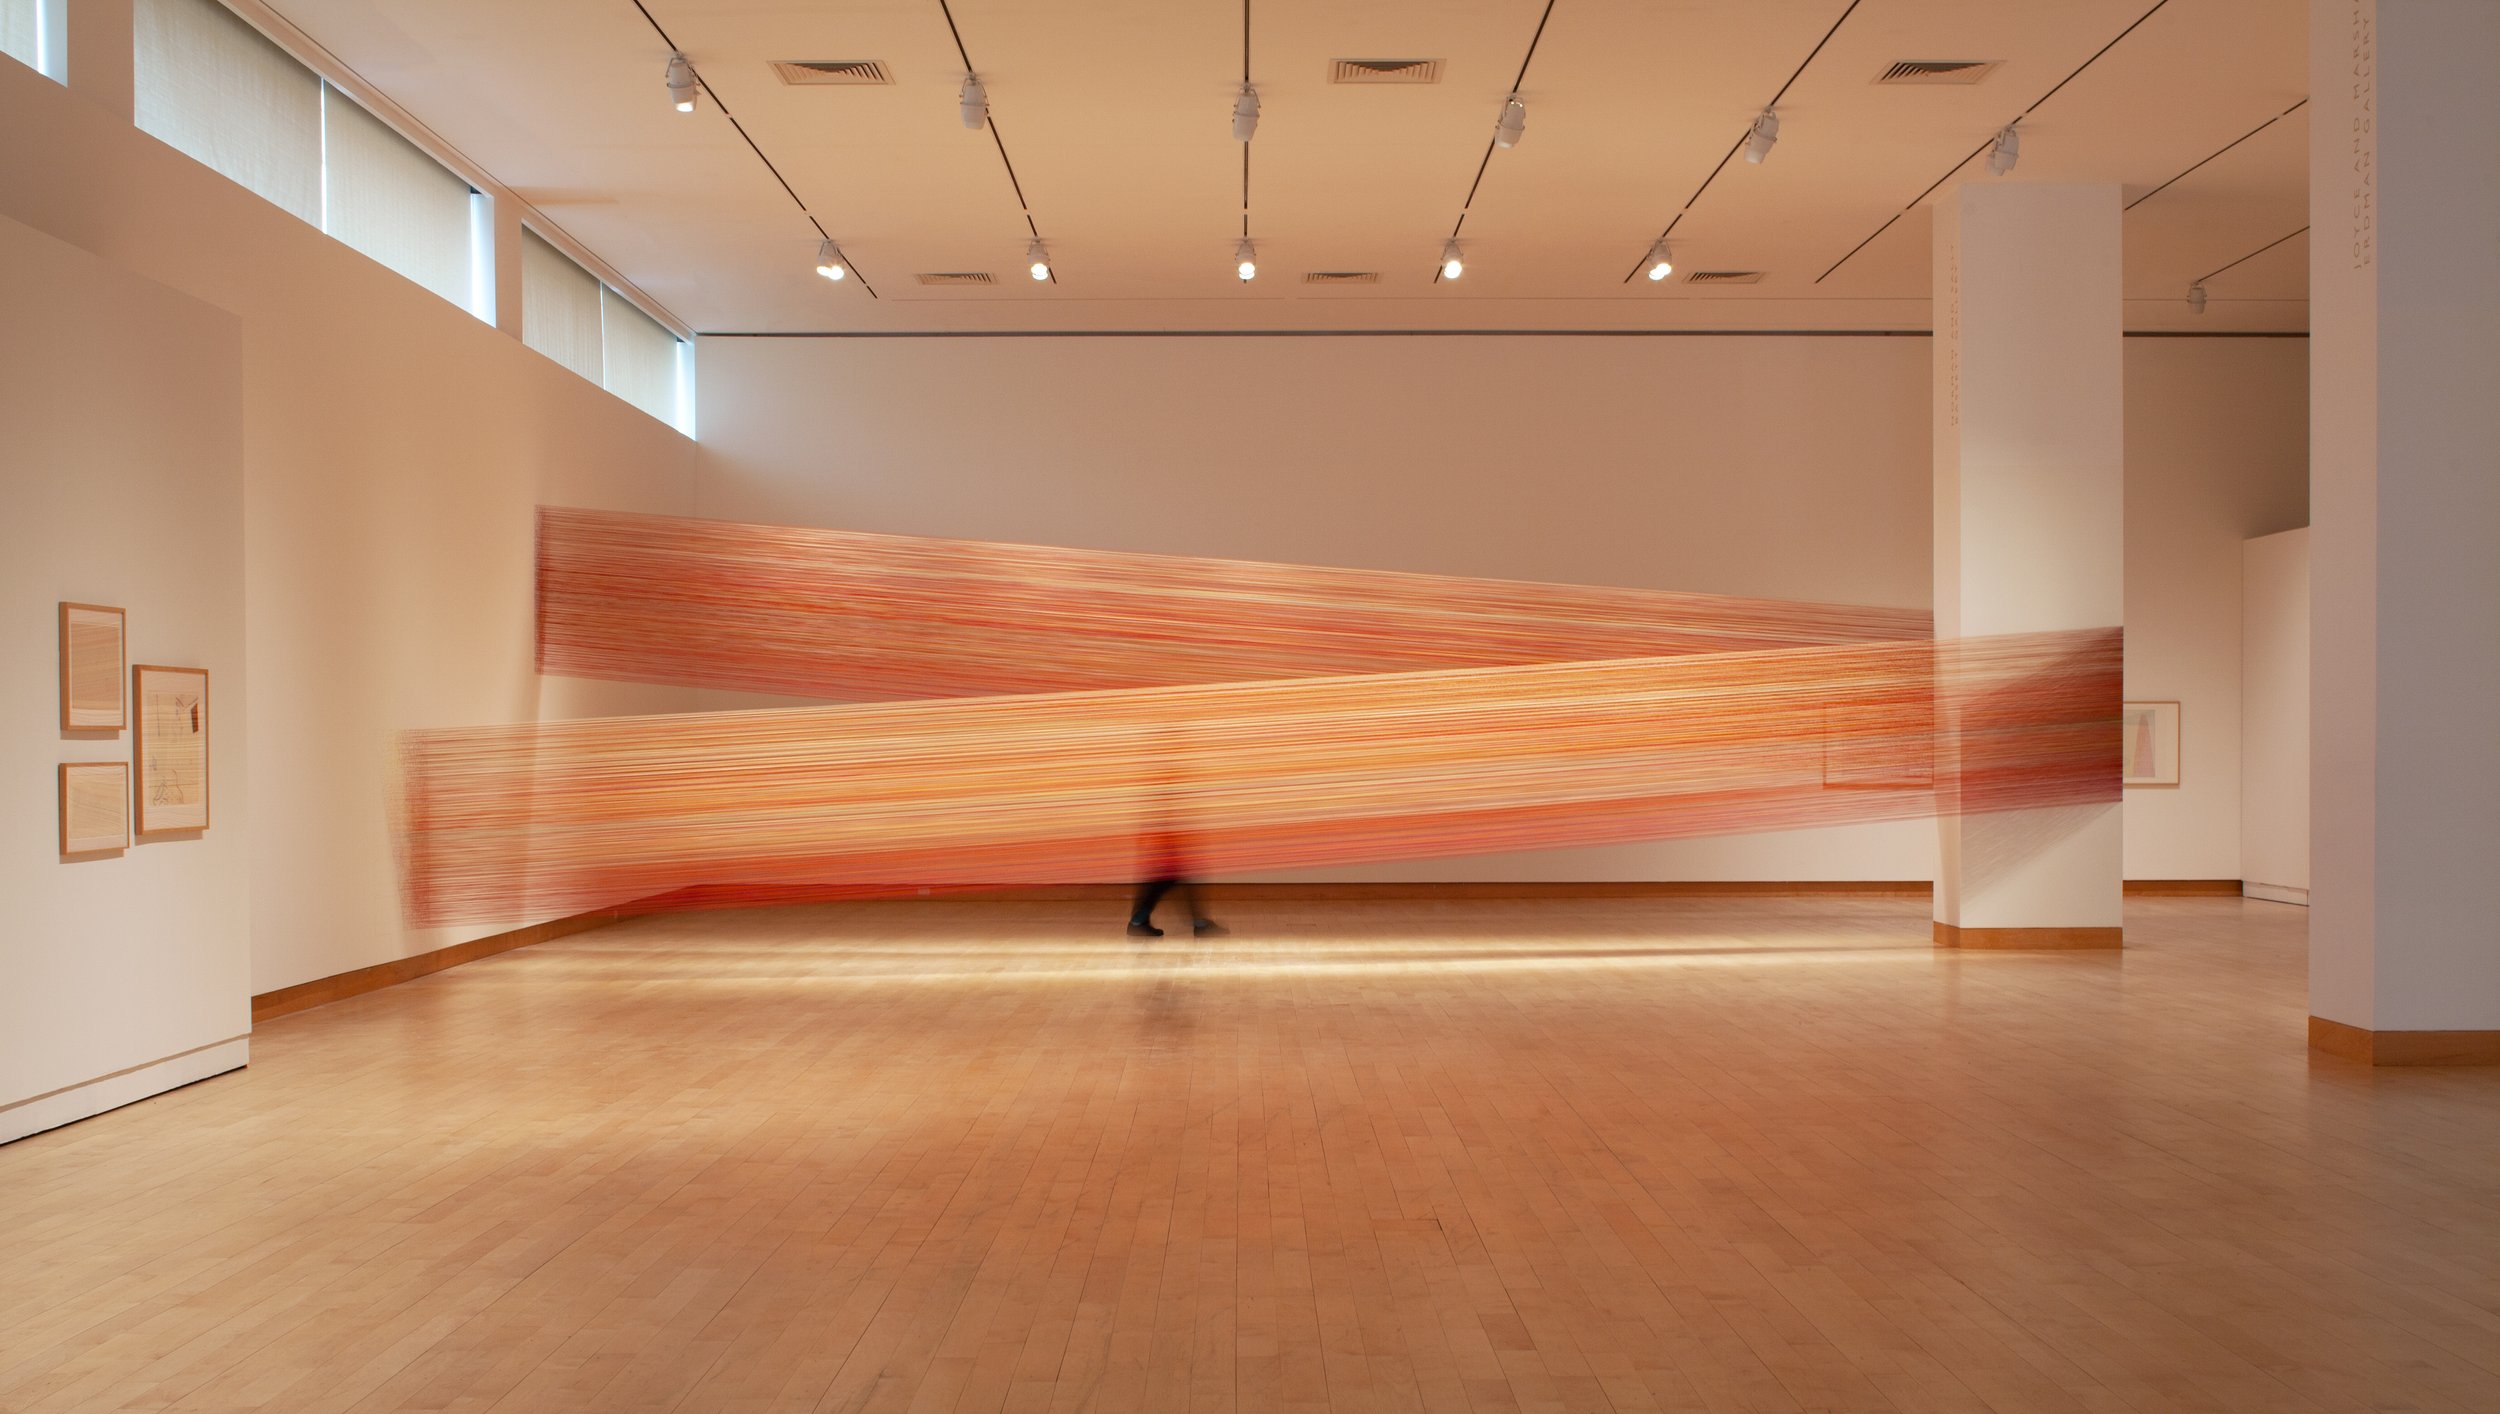    impossible red   2023 cotton thread and staples 10 x 33 x 16 feet exhibited in   imaginary i,   curated by Christina Brungardt at Madison Museum of Contemporary Art, Madison, WI 